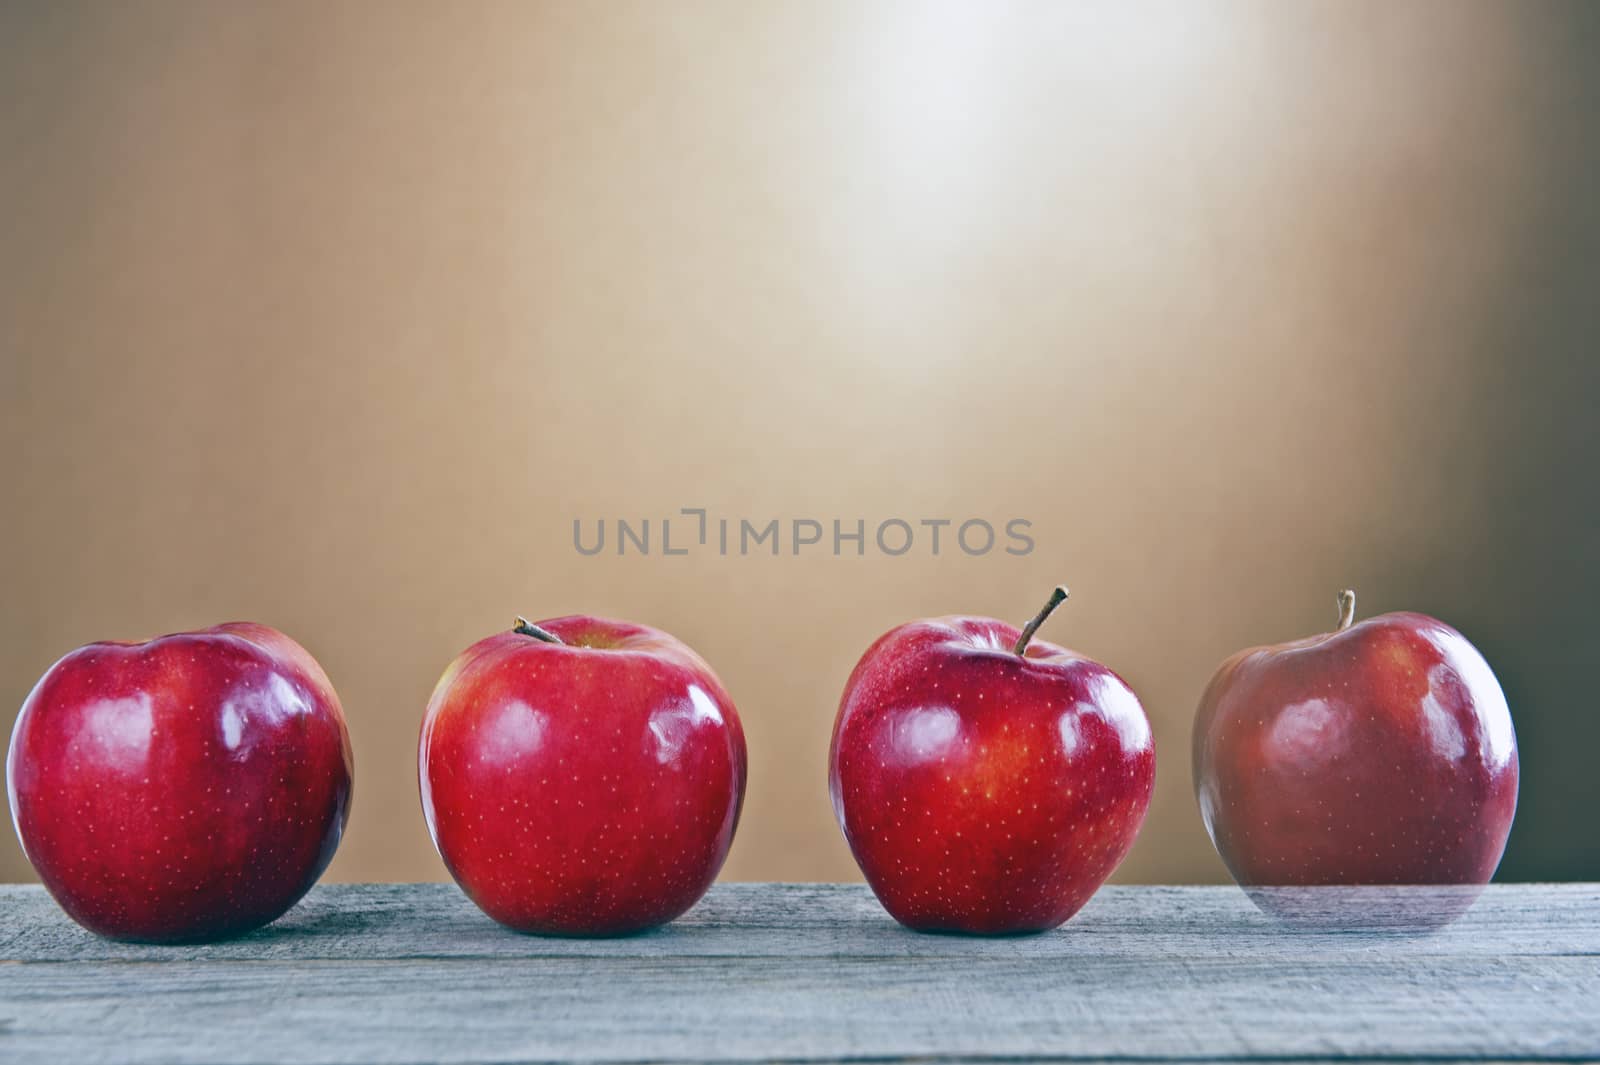 Red apples on a wooden table by Michalowski